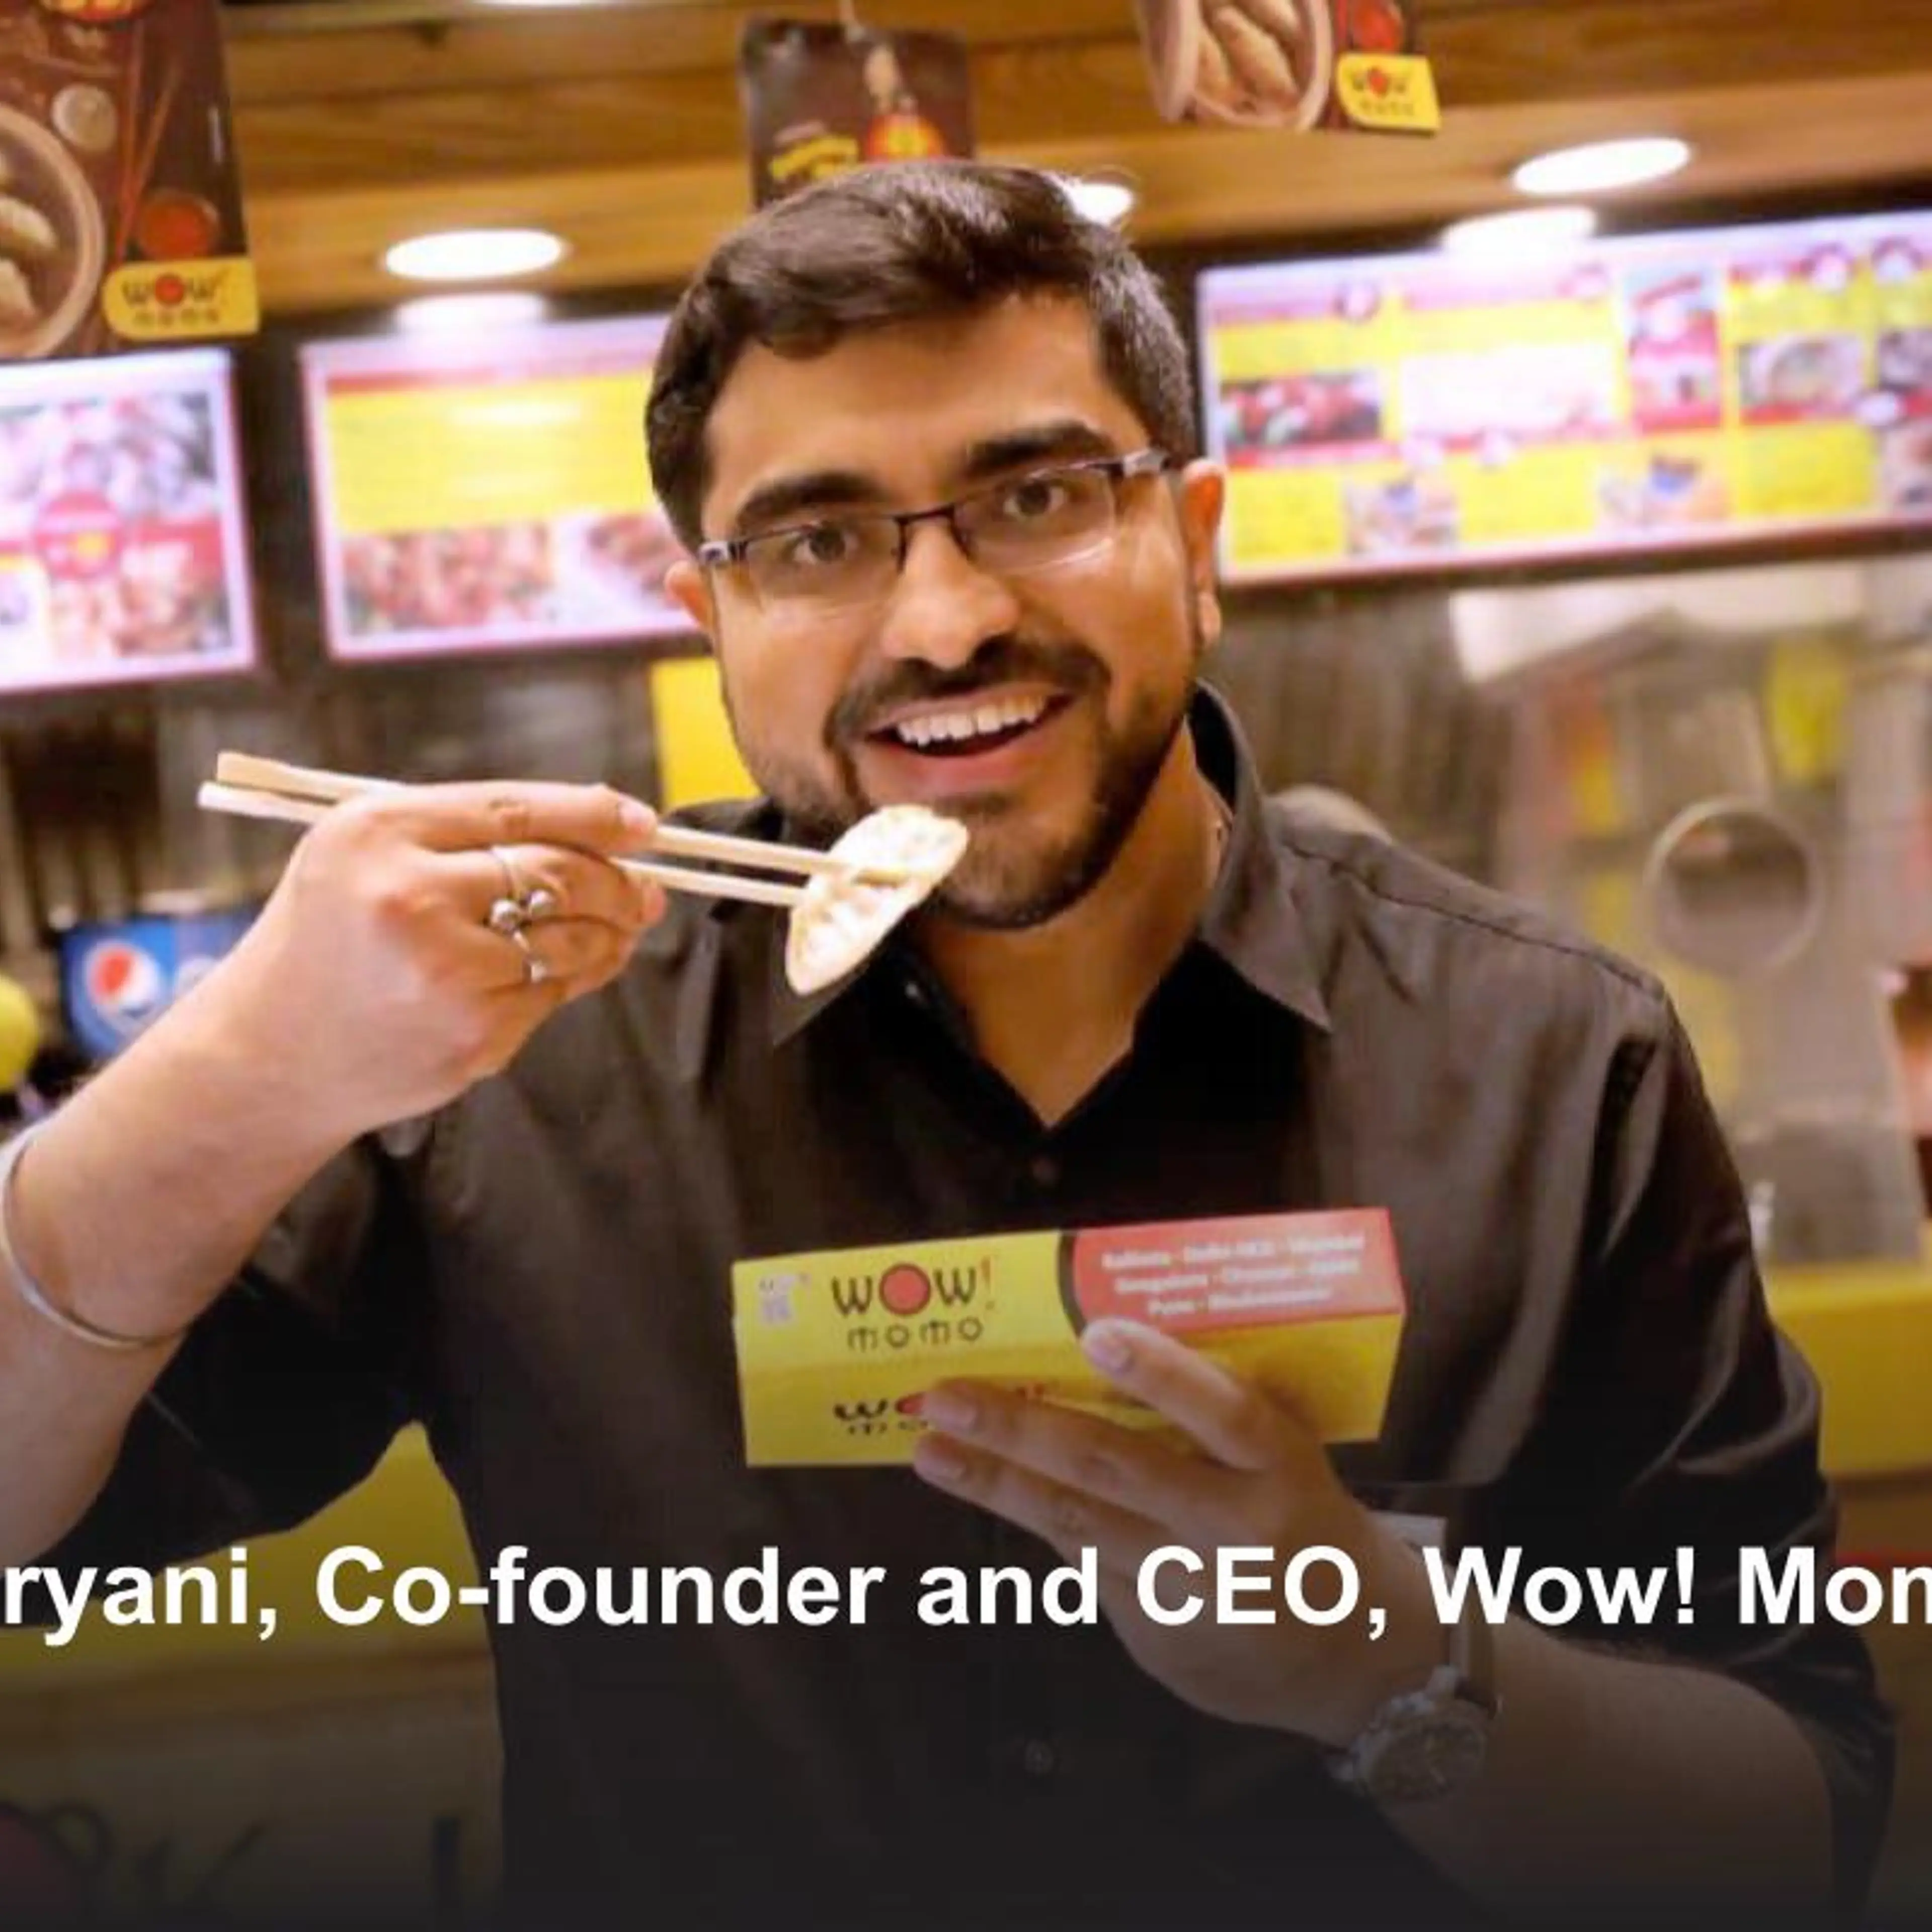 Wow! Momo Foods expects FY24 revenue to cross Rs 500 Cr, eyes Southeast Asia, GCC entry